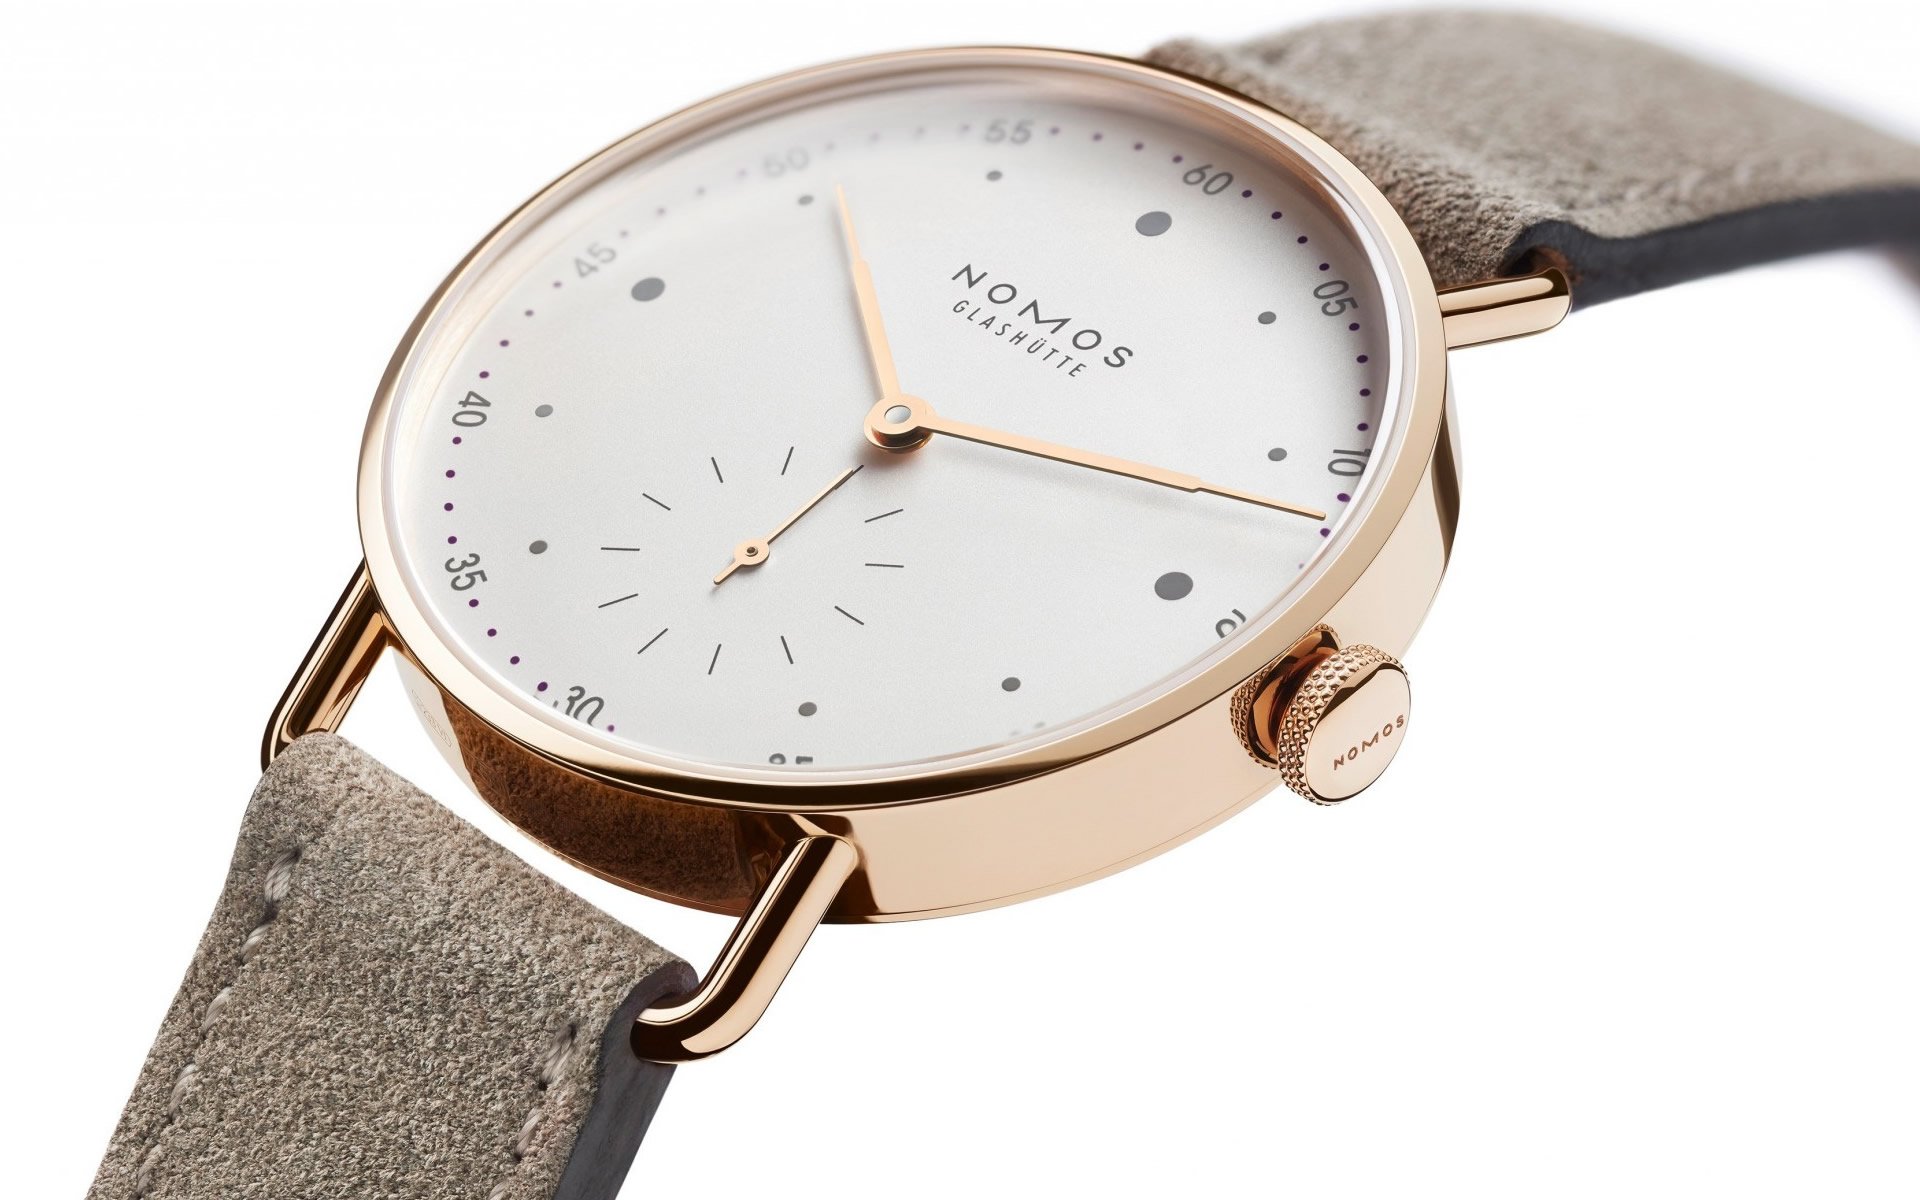 Introducing a brand-new addition to the Metro collection from NOMOS Glashütte